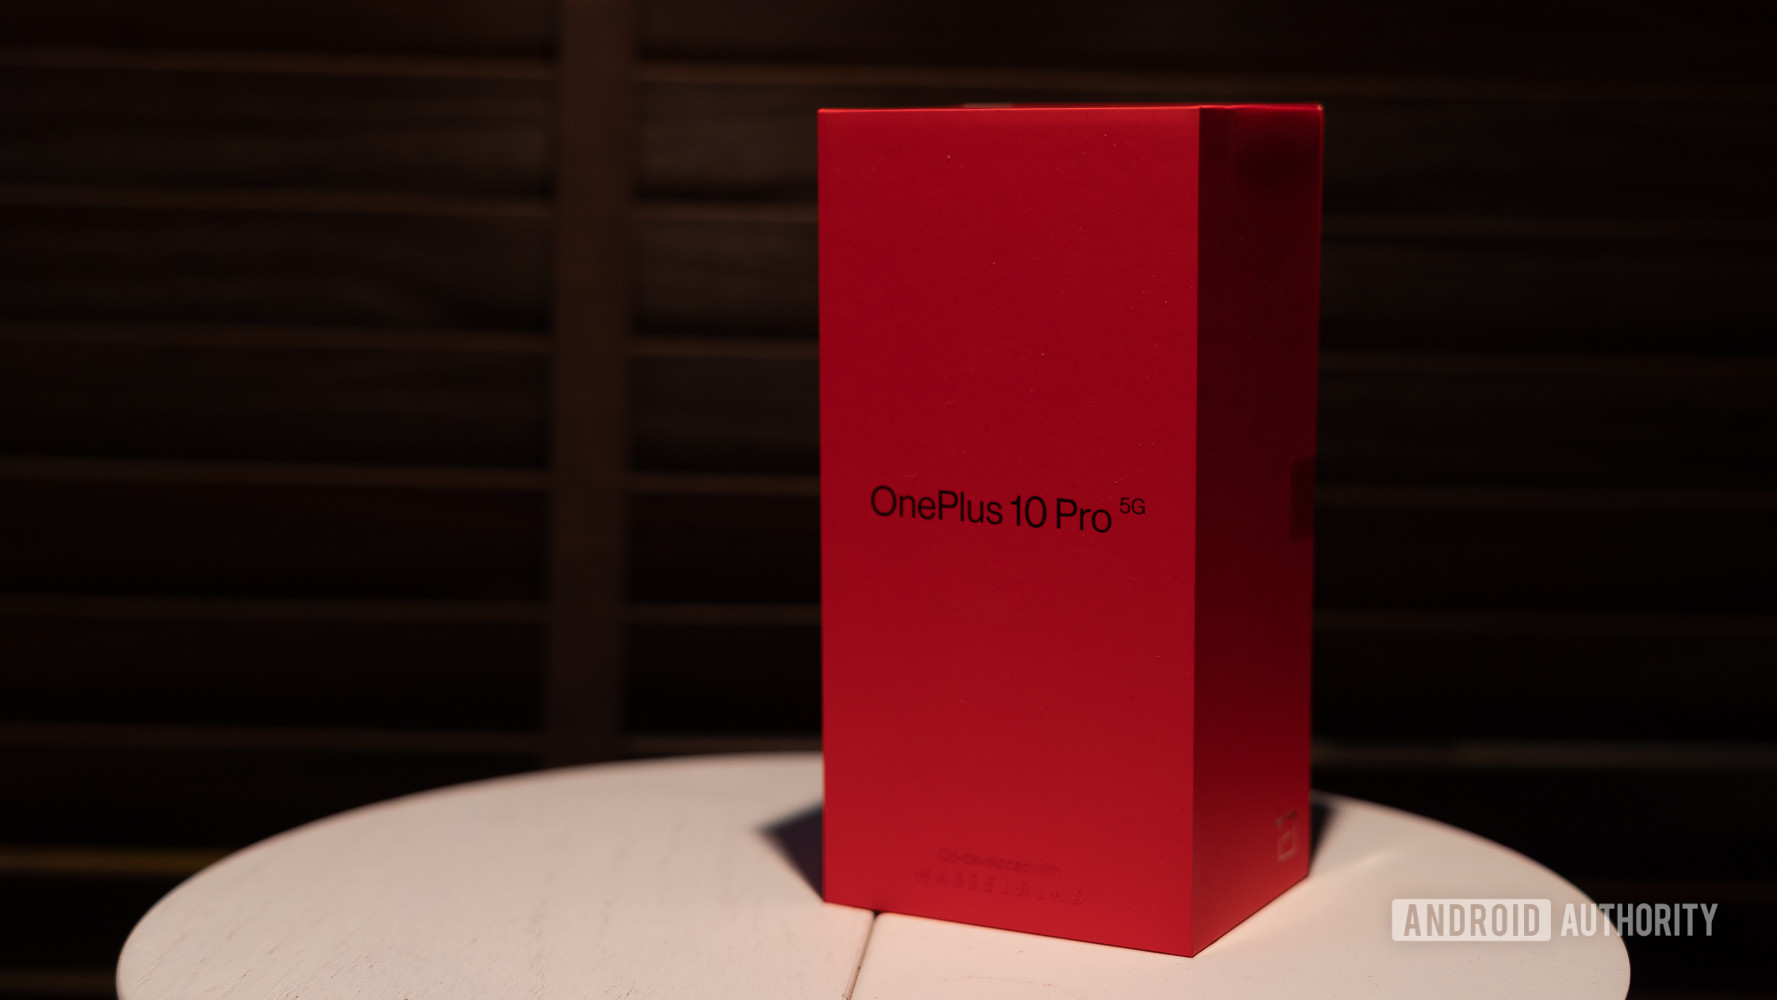 OnePlus 10 Pro box on a table